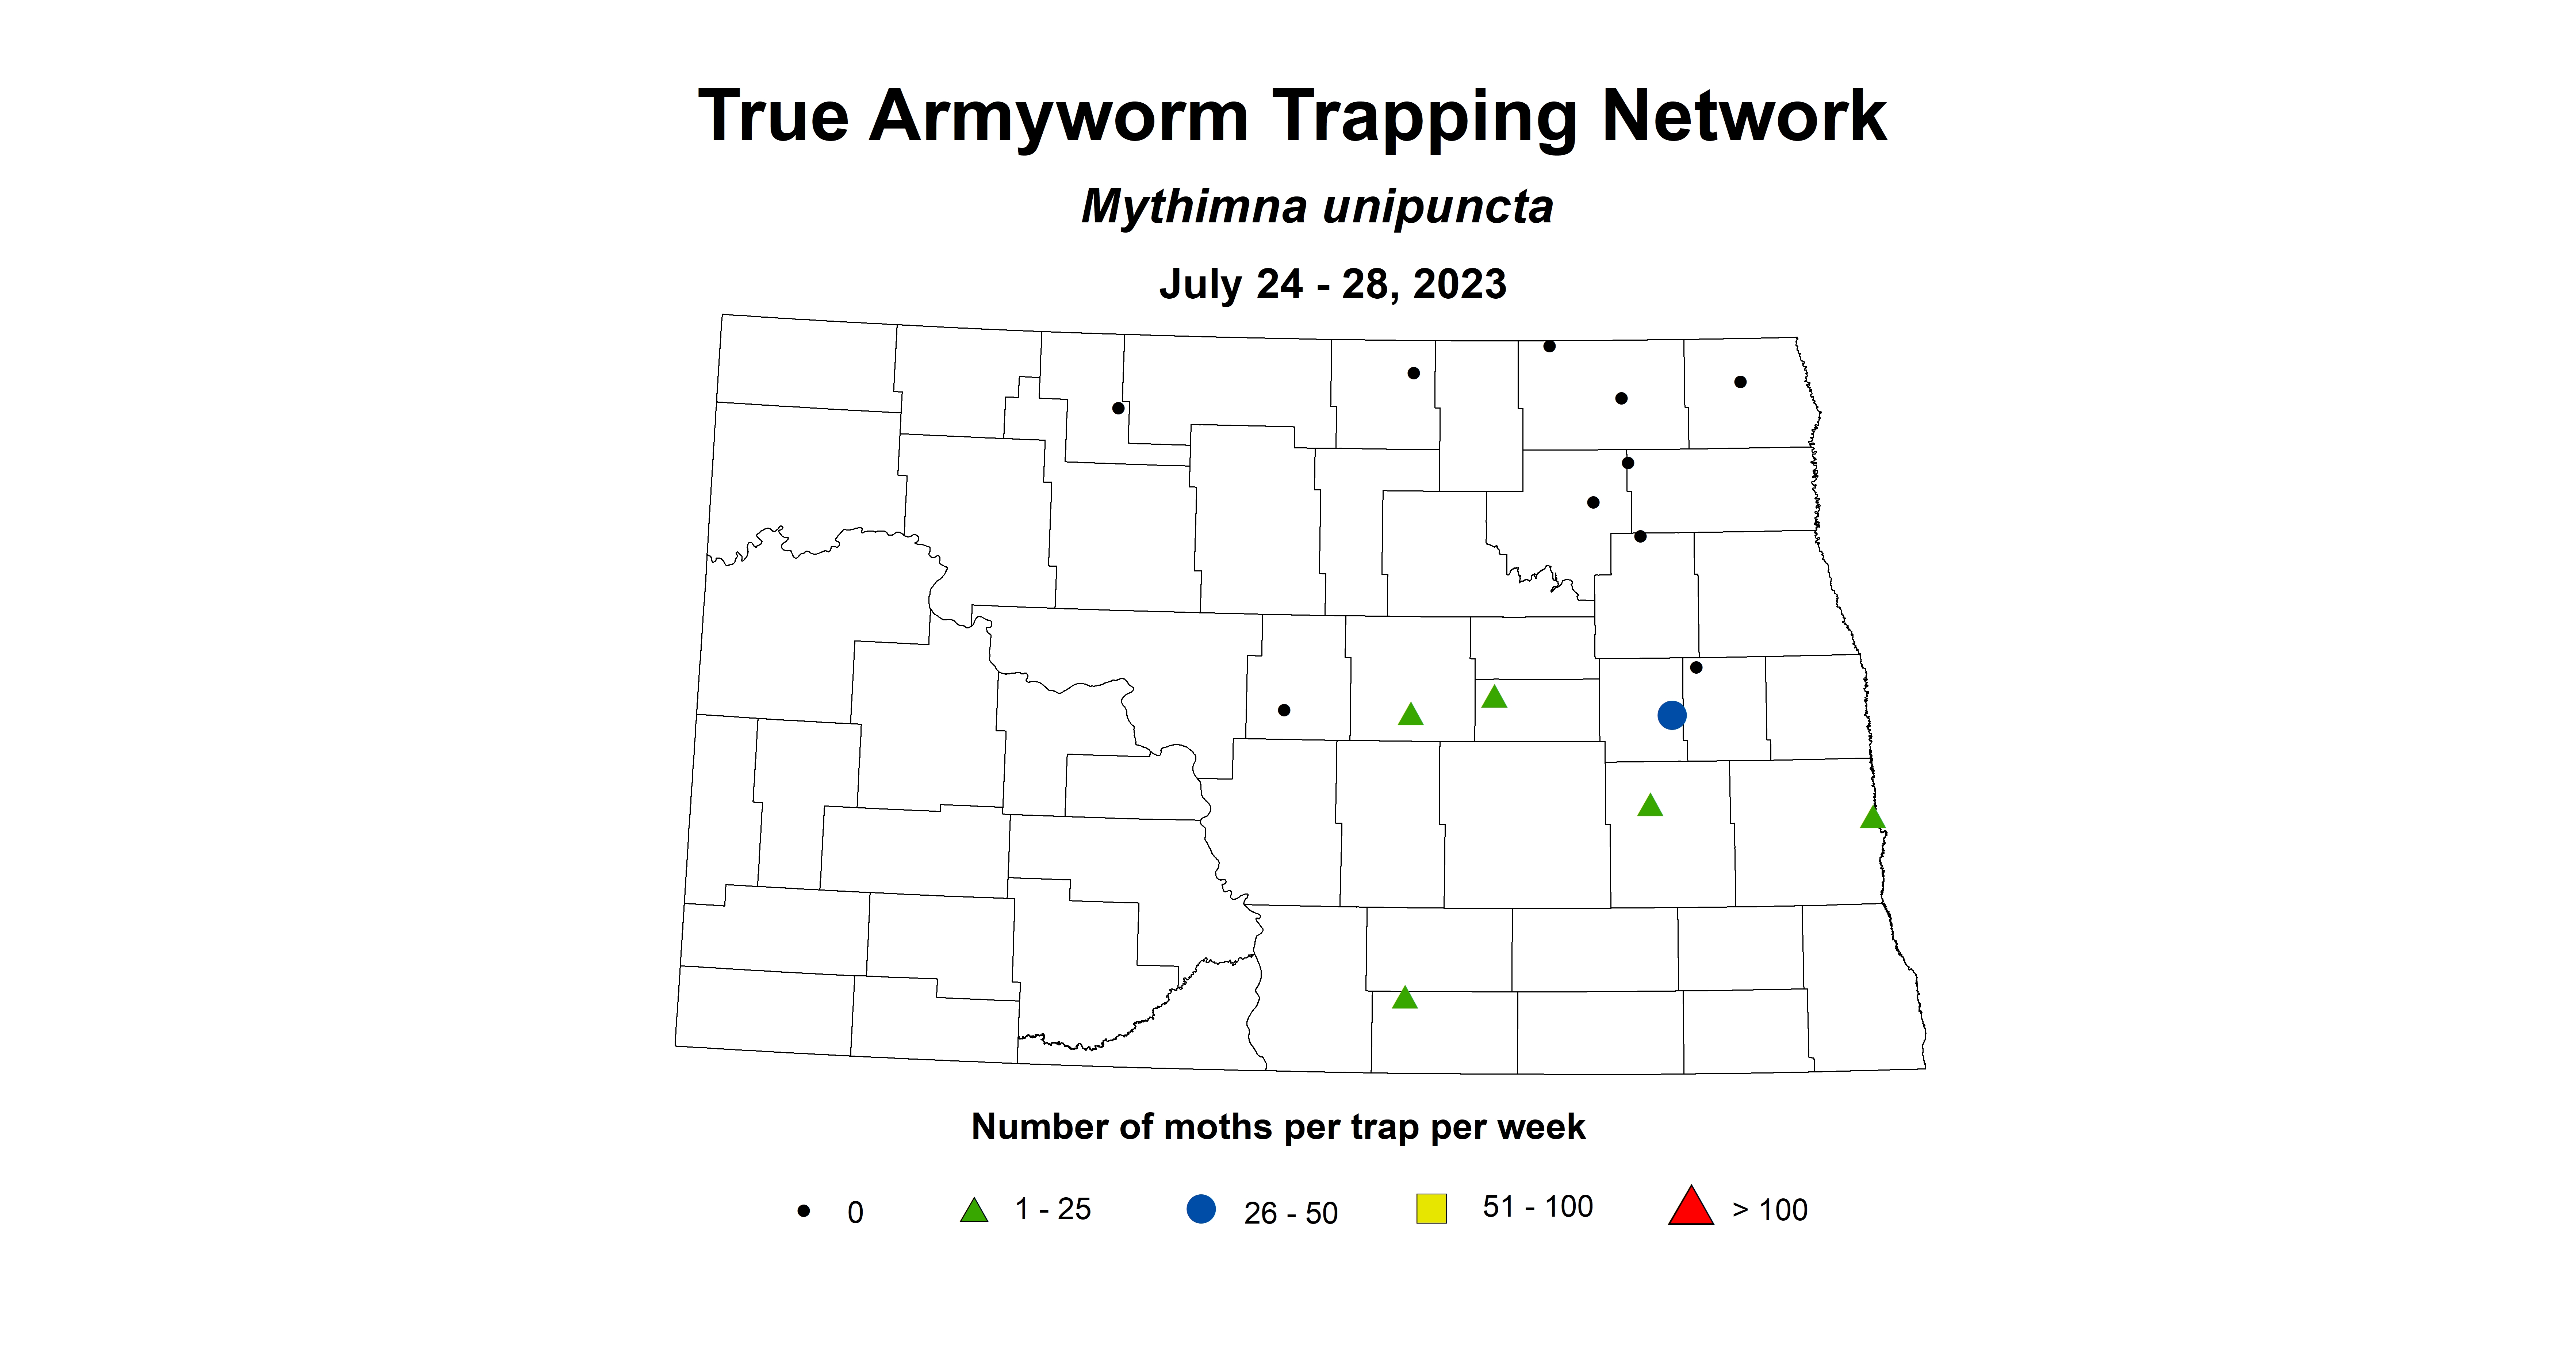 wheat insecttrap true armyworm July 24-28 2023